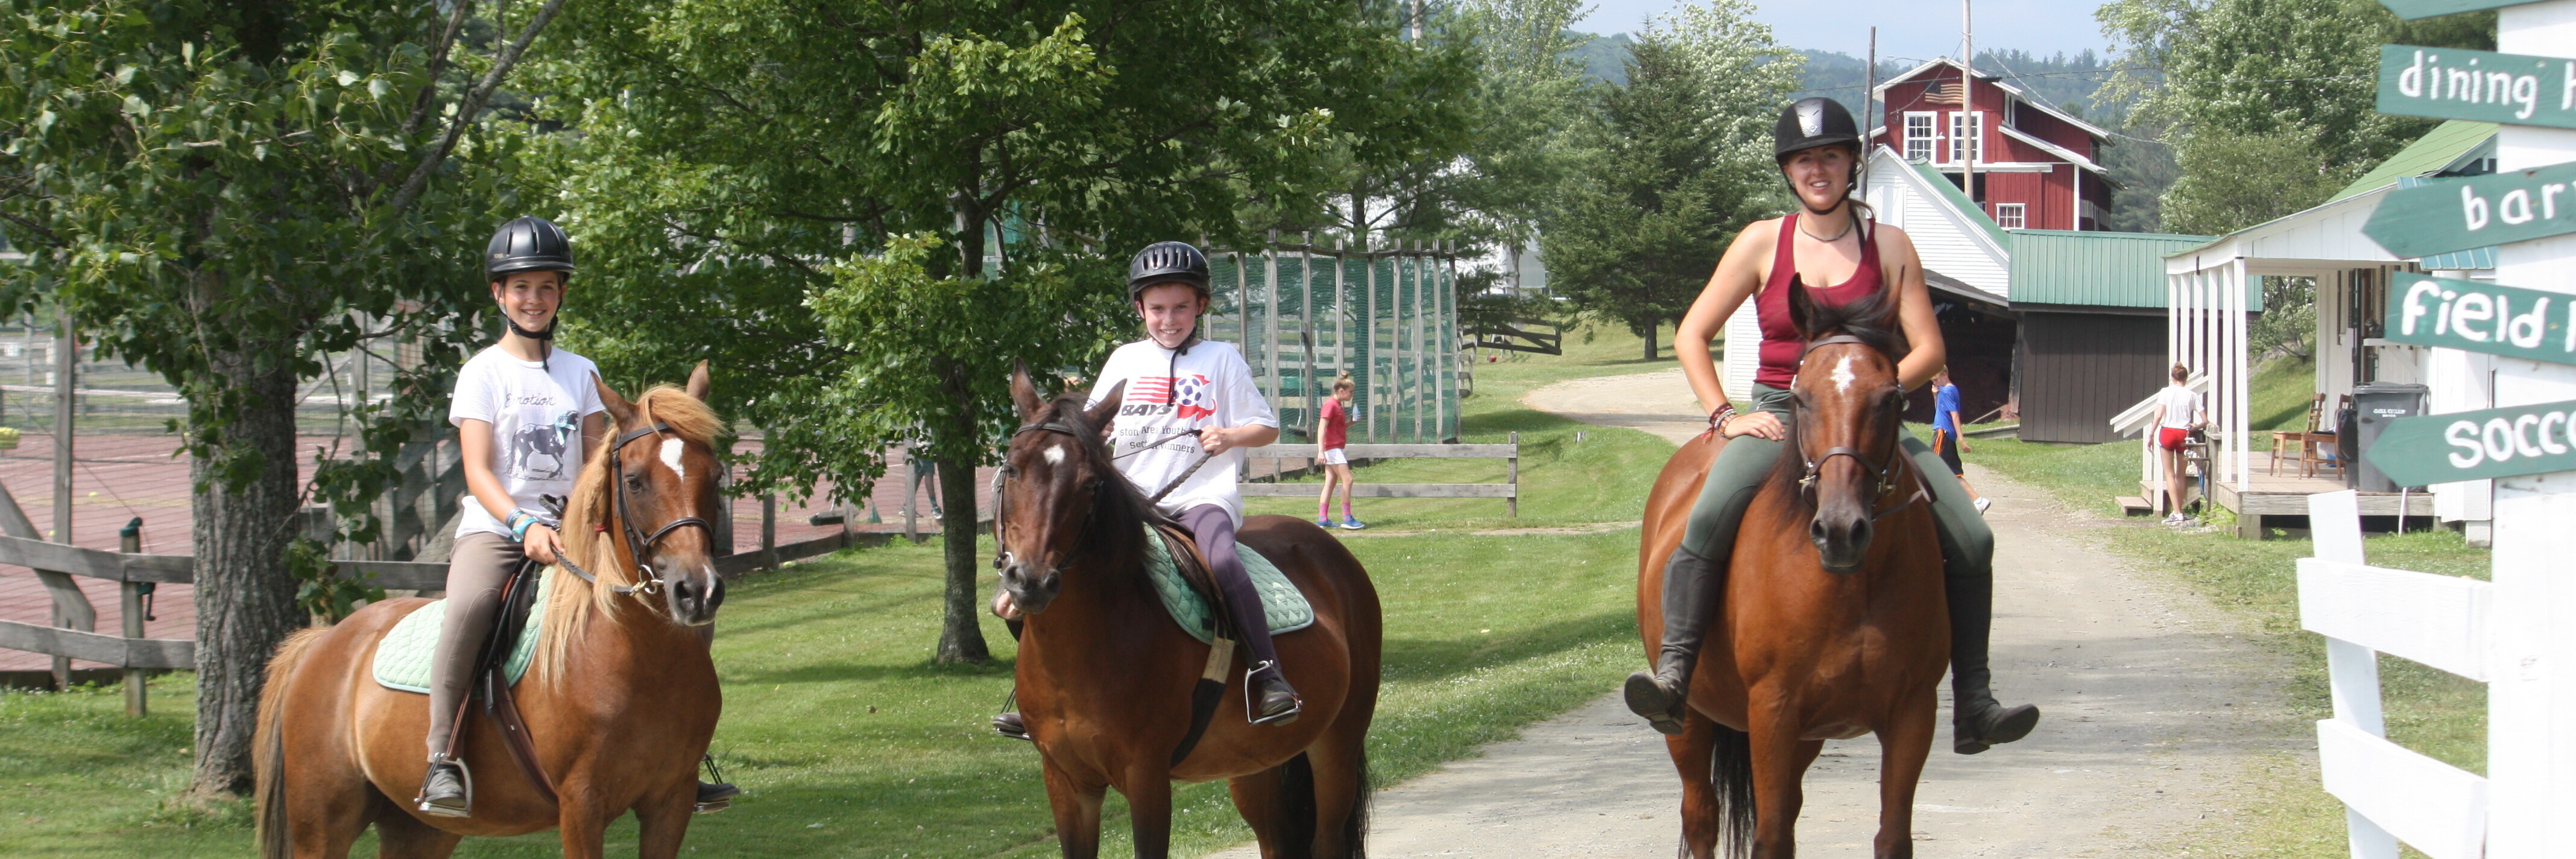 Campers riding horses 